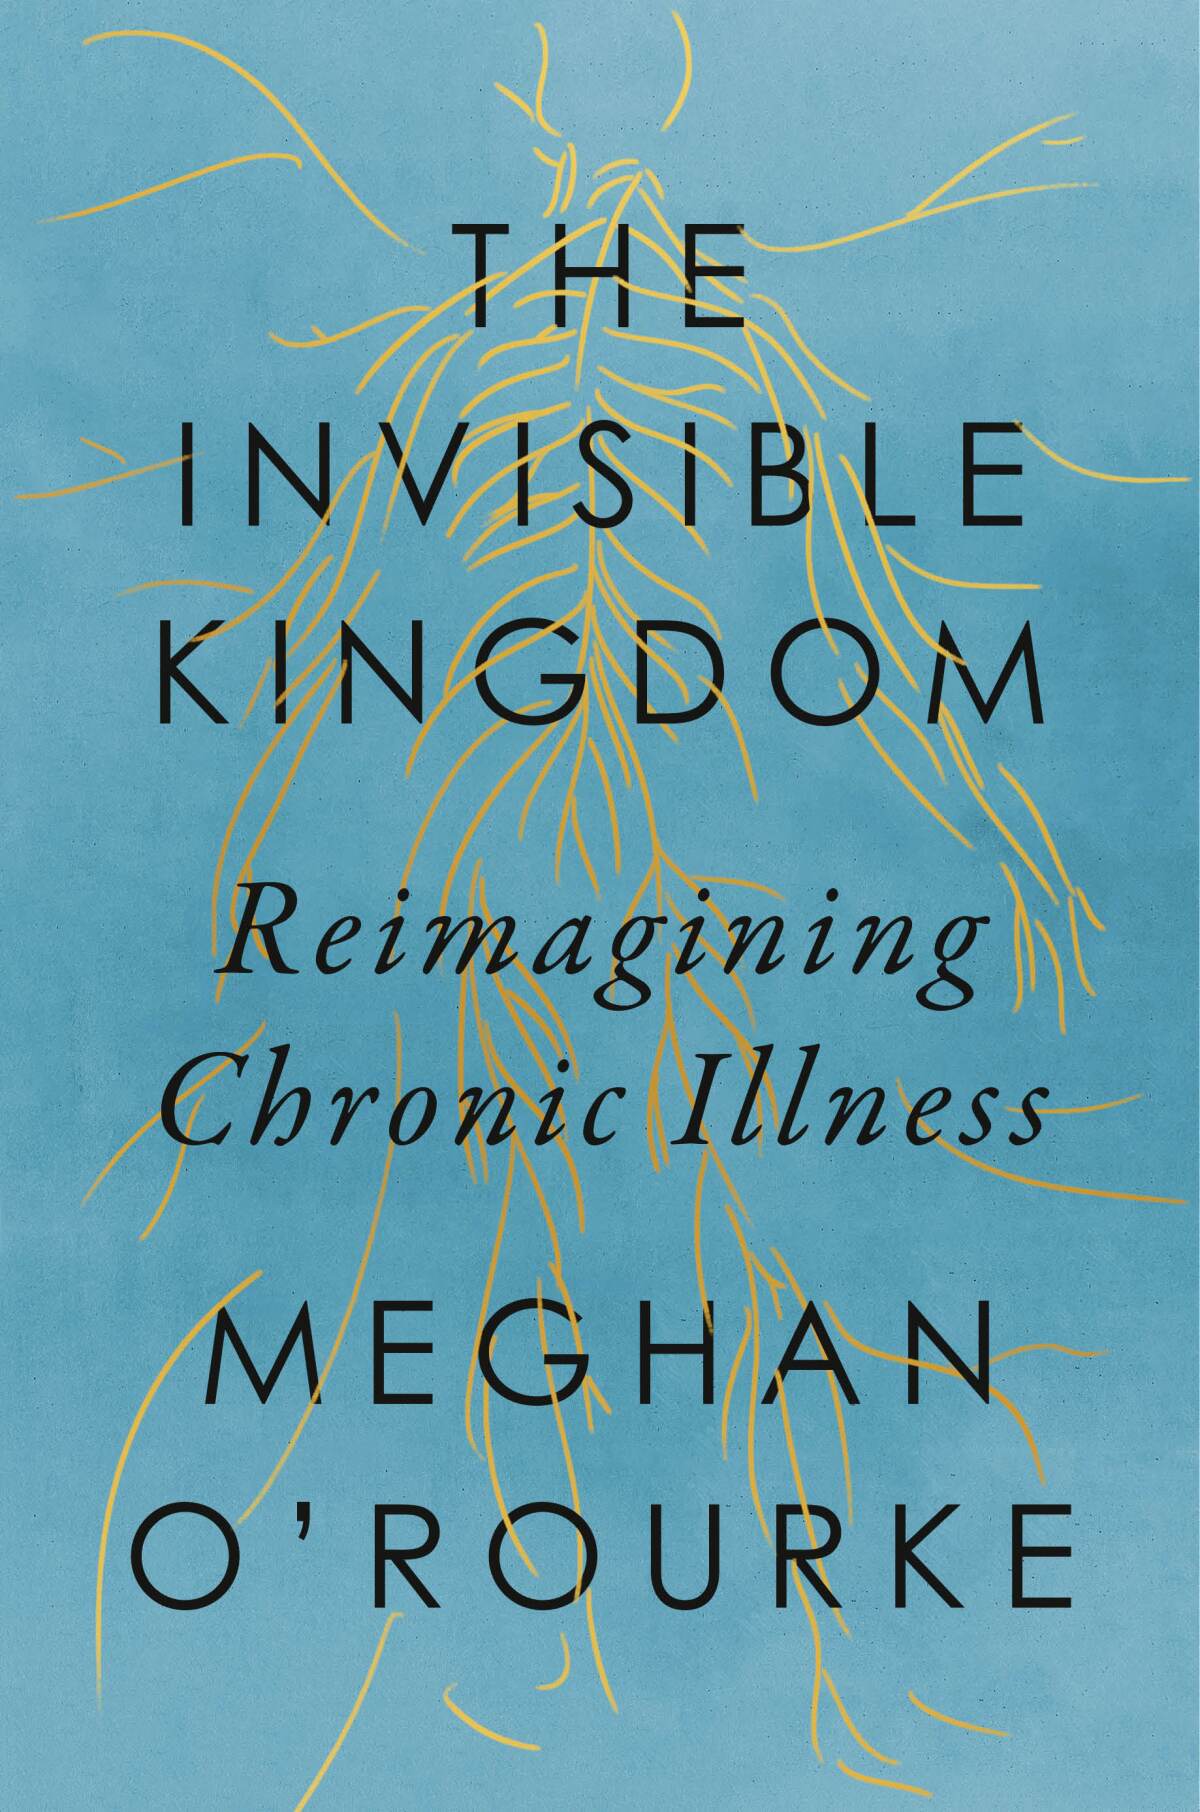 "Invisible Kingdom: Reimagining Chronic Illness," by Meghan O'Rourke